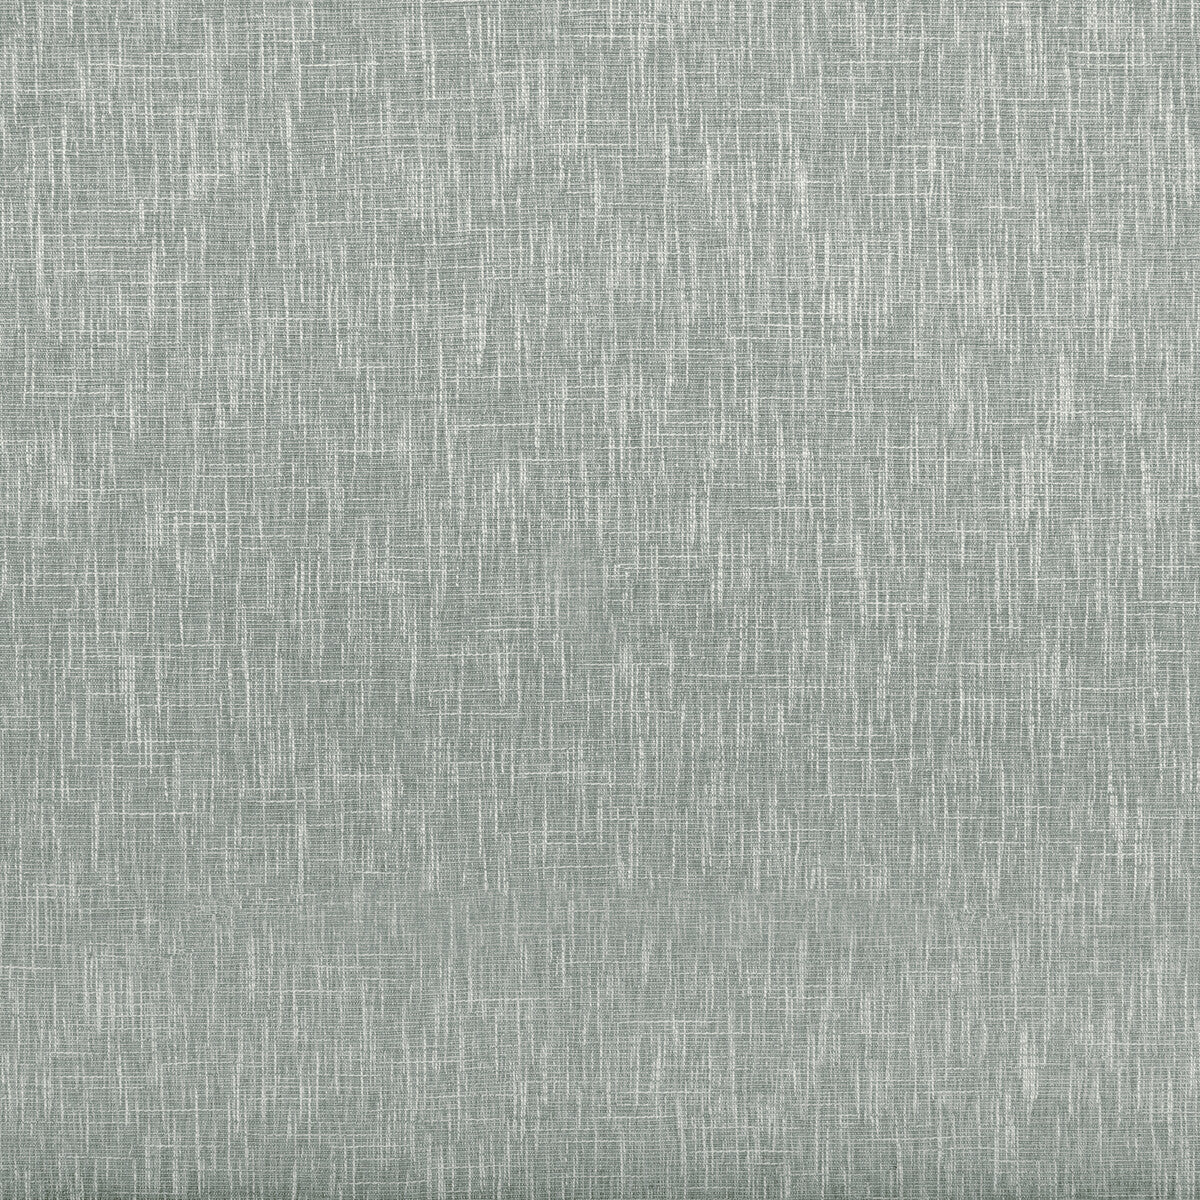 Maris fabric in grey color - pattern 35923.1121.0 - by Kravet Basics in the Monterey collection